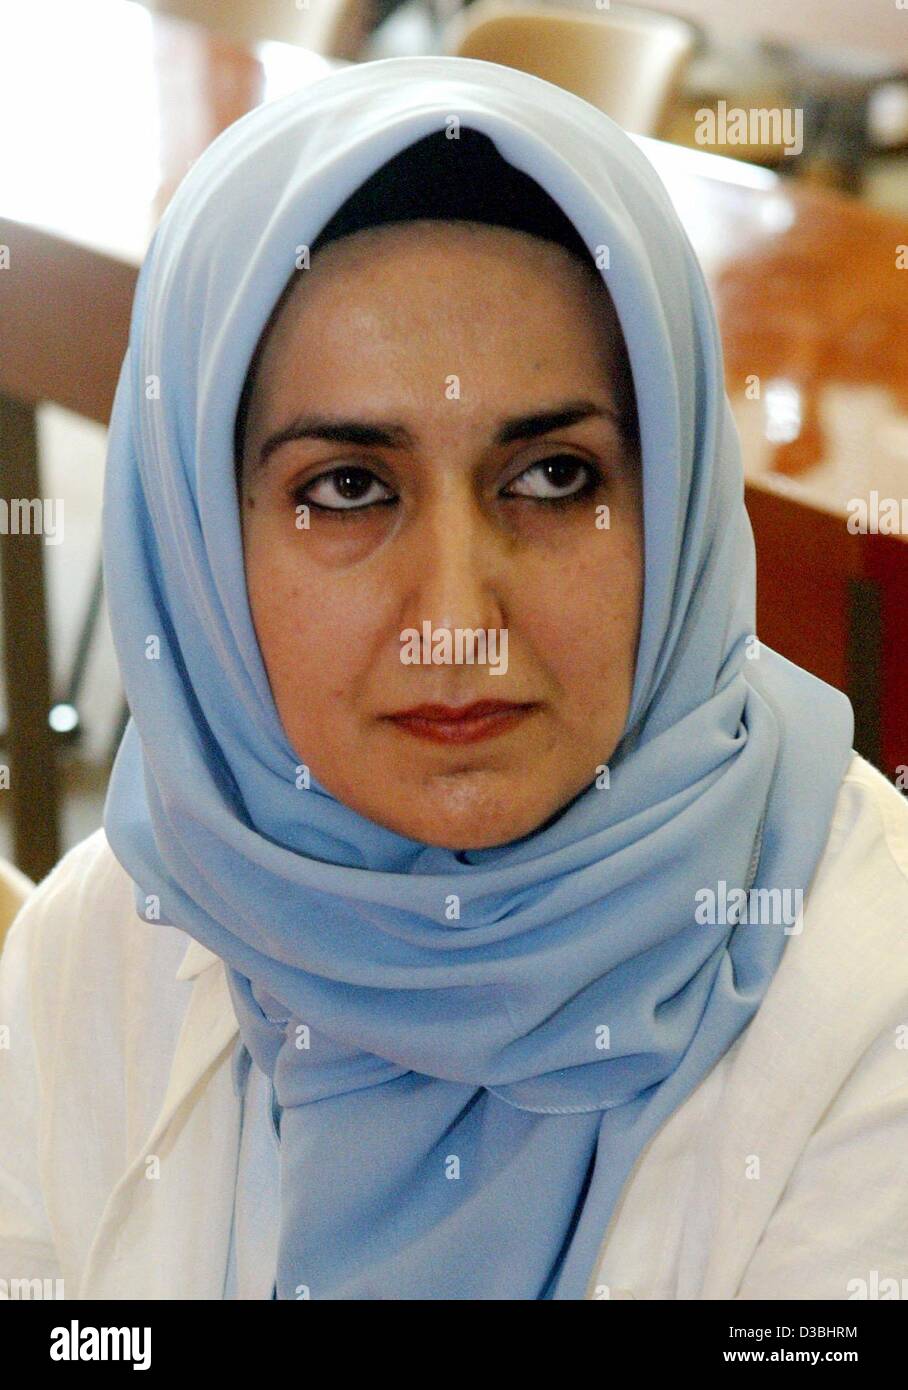 (dpa) - Muslim teacher Fereshta Ludin wears her head scarf and sits in the courtroom of the Constitutional Court in Karlsruhe, Germany, 3 June 2003. The judges of the second senat of the Constitutional Court opened the hearing on the 'Kopftuch Streit' (head scarf case). The court examines the appeal Stock Photo